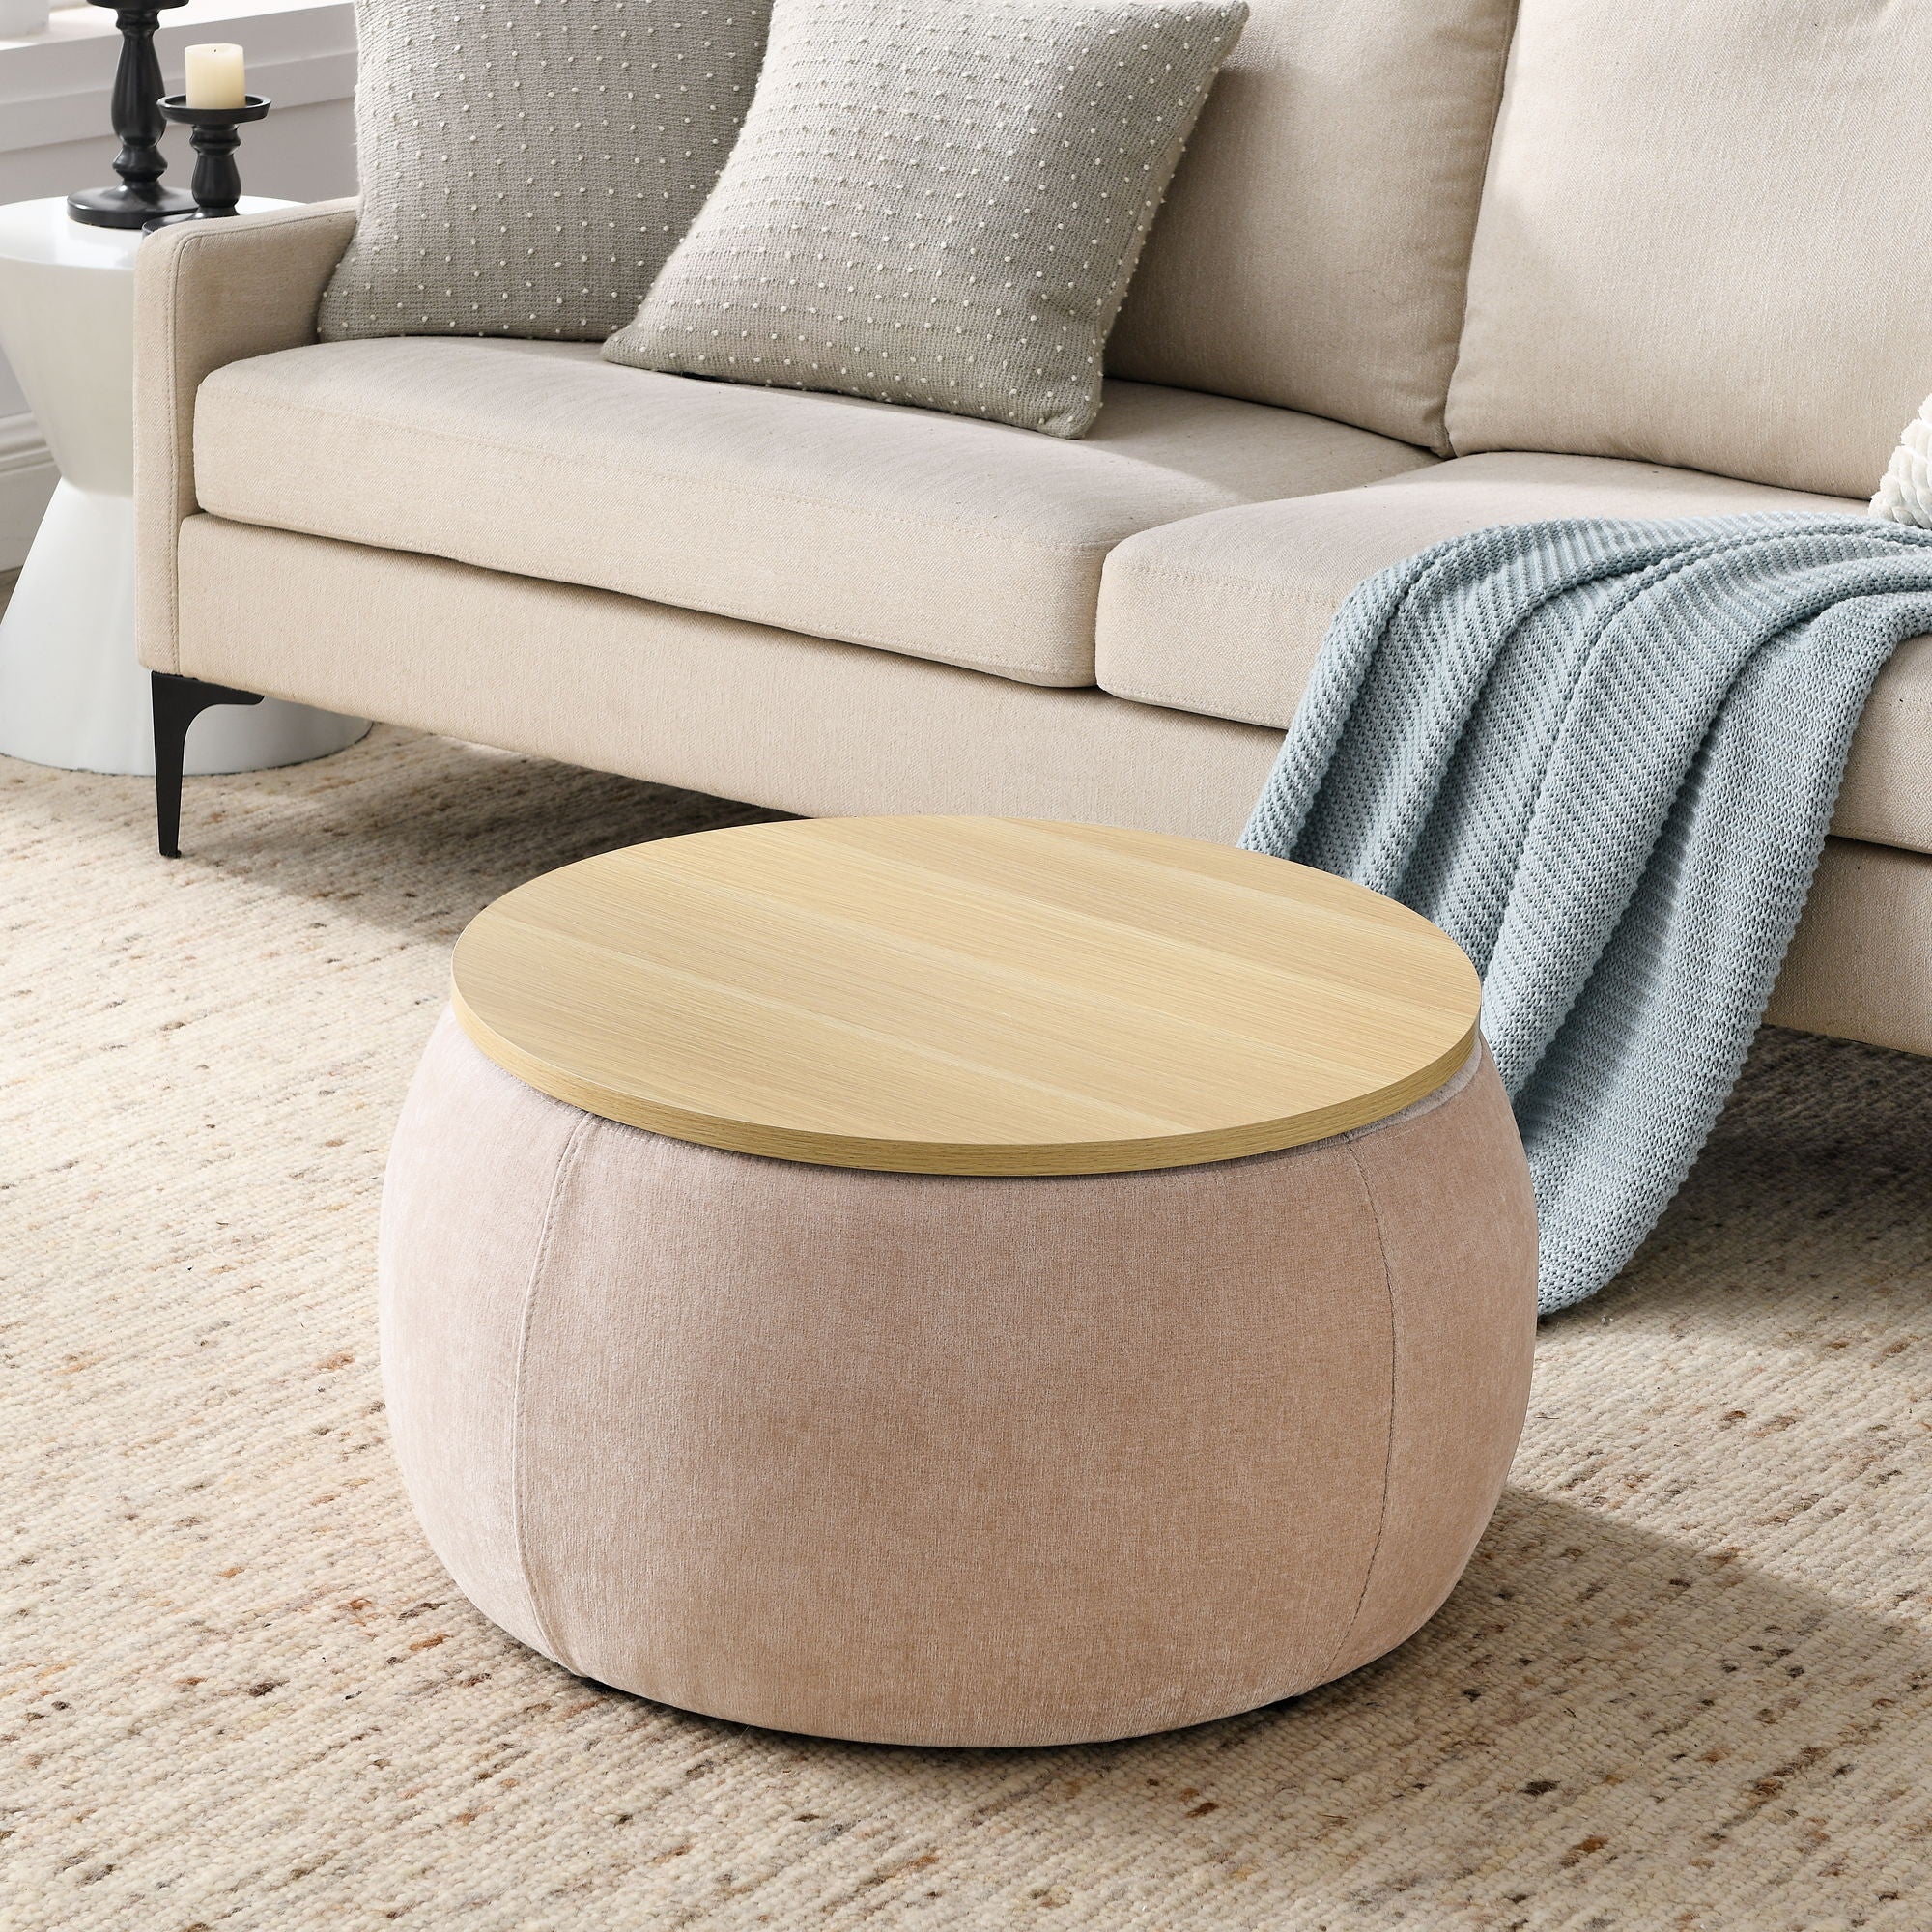 Round Storage Ottoman, 2 In 1 Function, Work As End Table And Ottoman, Pink